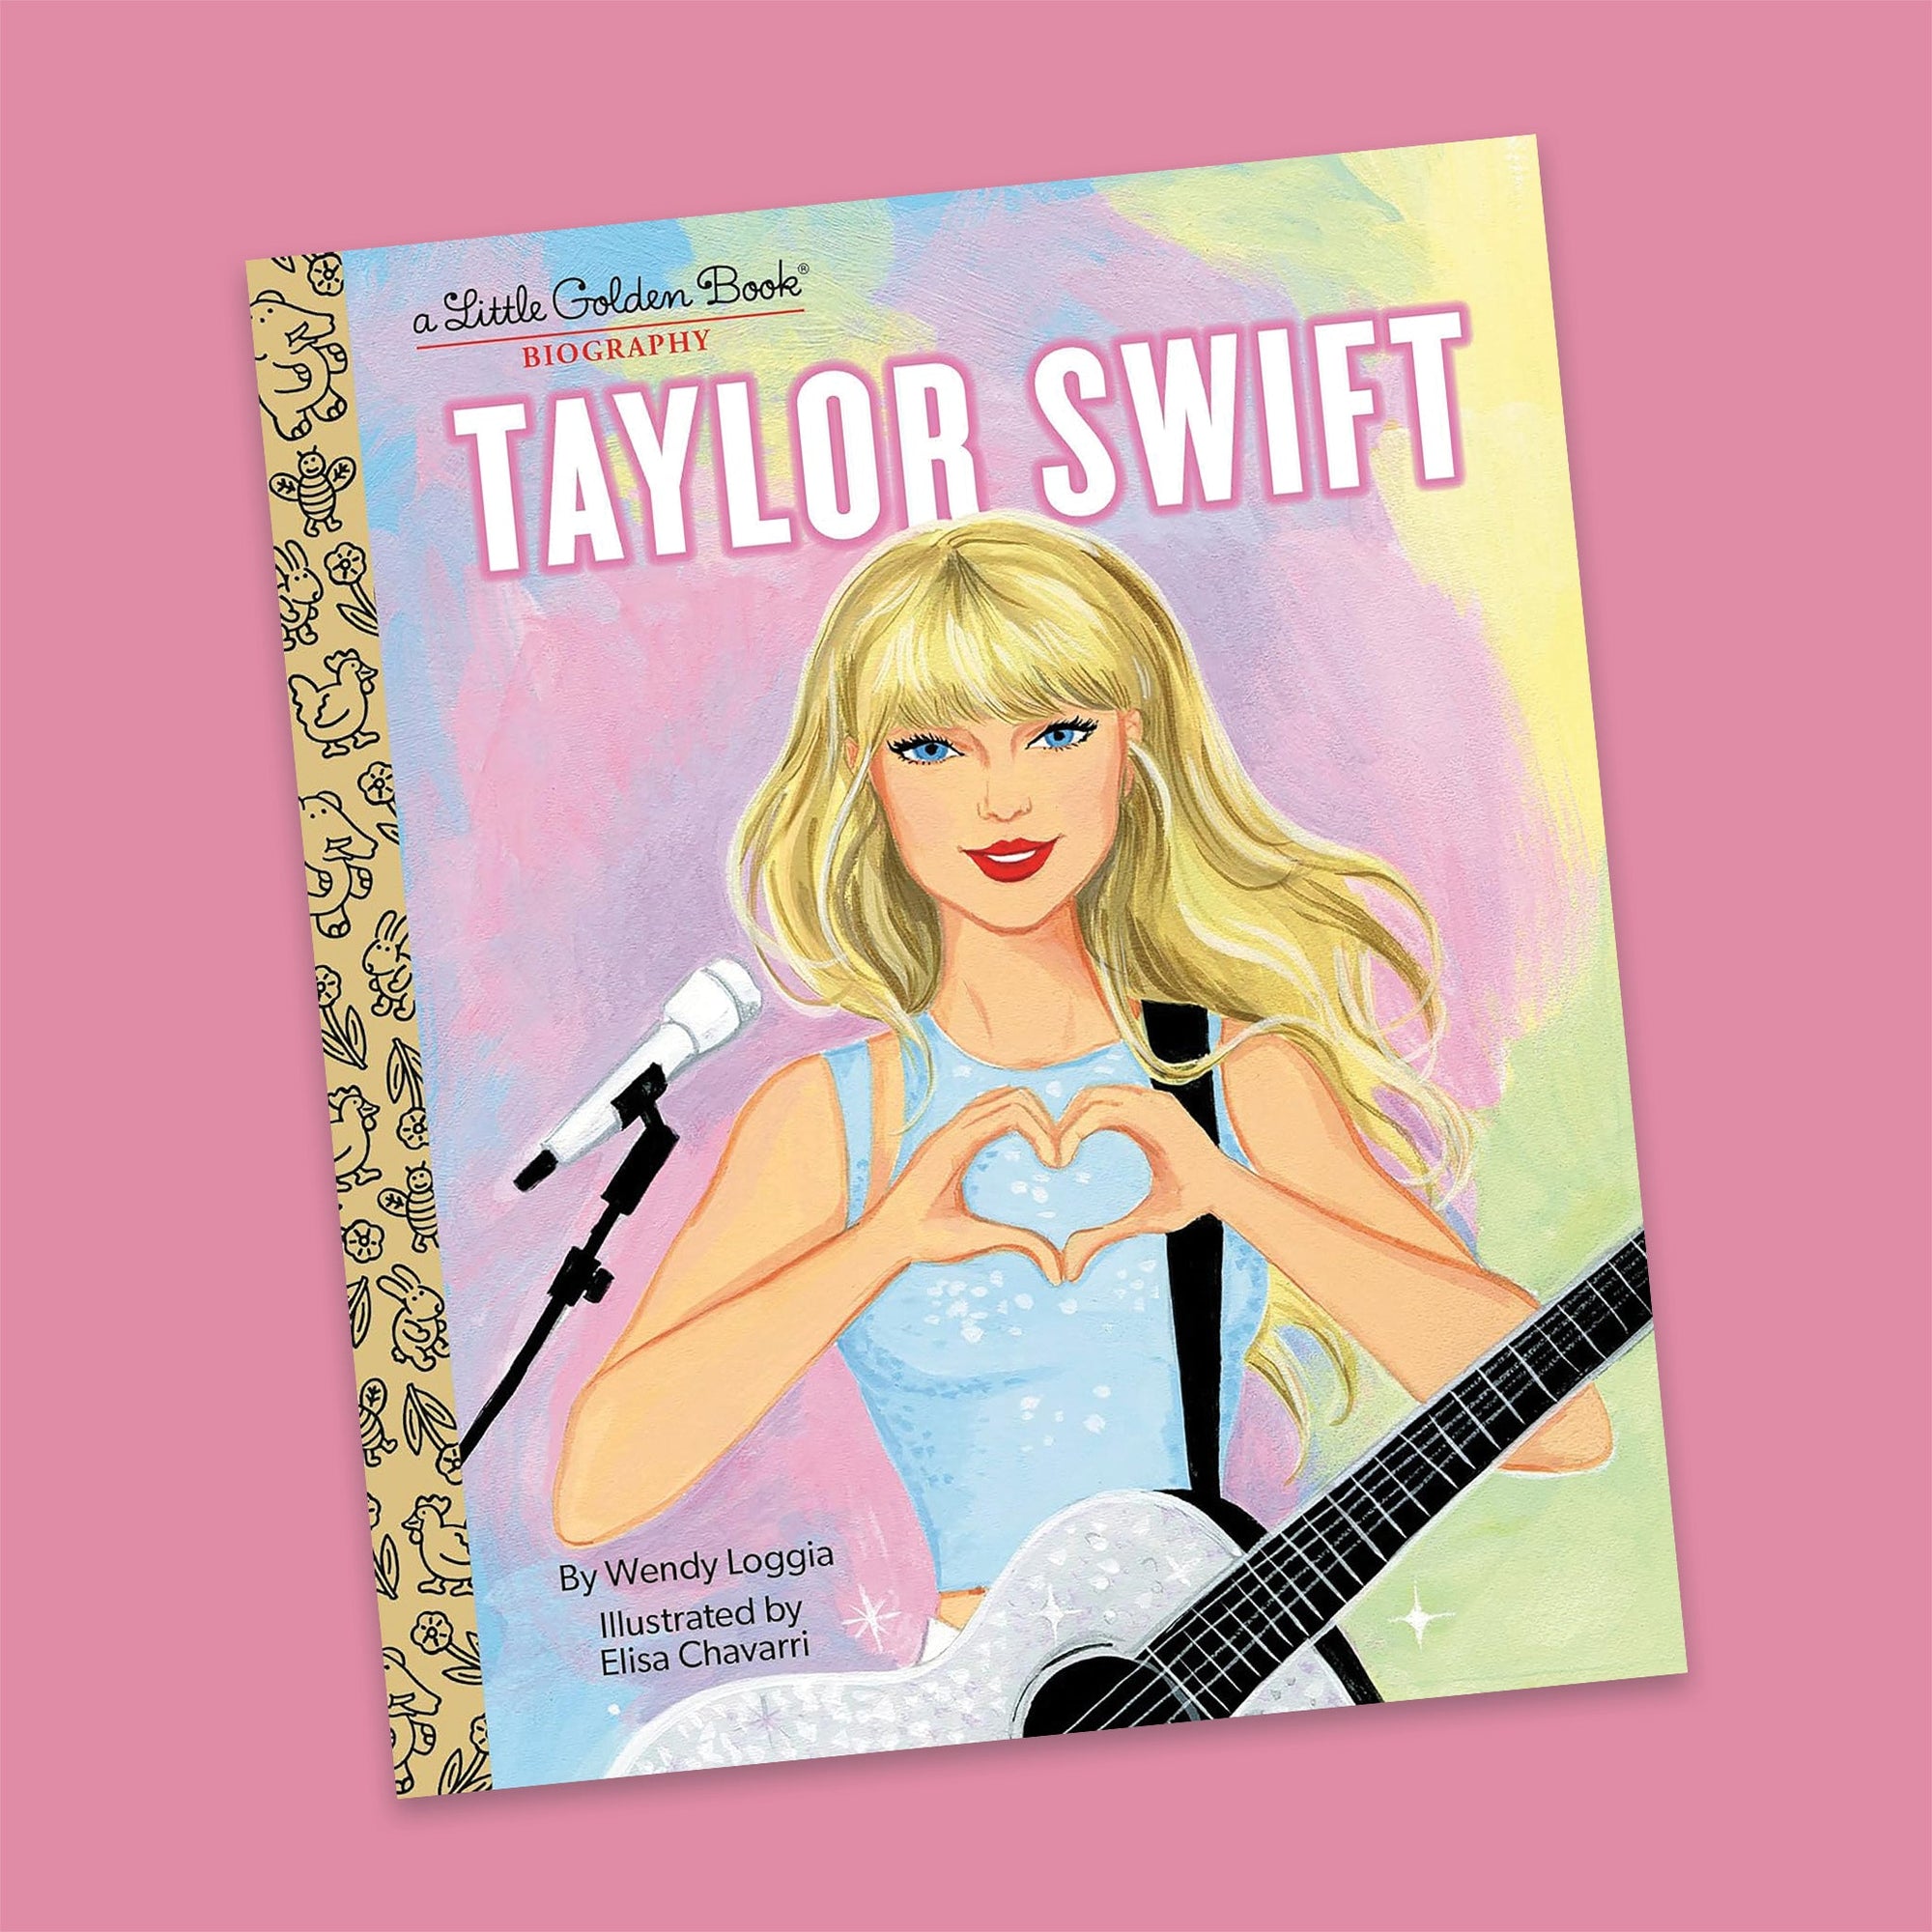 On a bubblegum pink background sits a book. This colorful, Taylor Swift inspired biography by A Little Golden Book is a painting of Taylor Swift holding a silver glitter guitar around her neck and she is using her hands to show a heart. There are painted pastel colors of  blue, pink, purple, green, and yellow. It says "TAYLOR SWIFT" in white, all caps block font with a bubblegum pink outline.